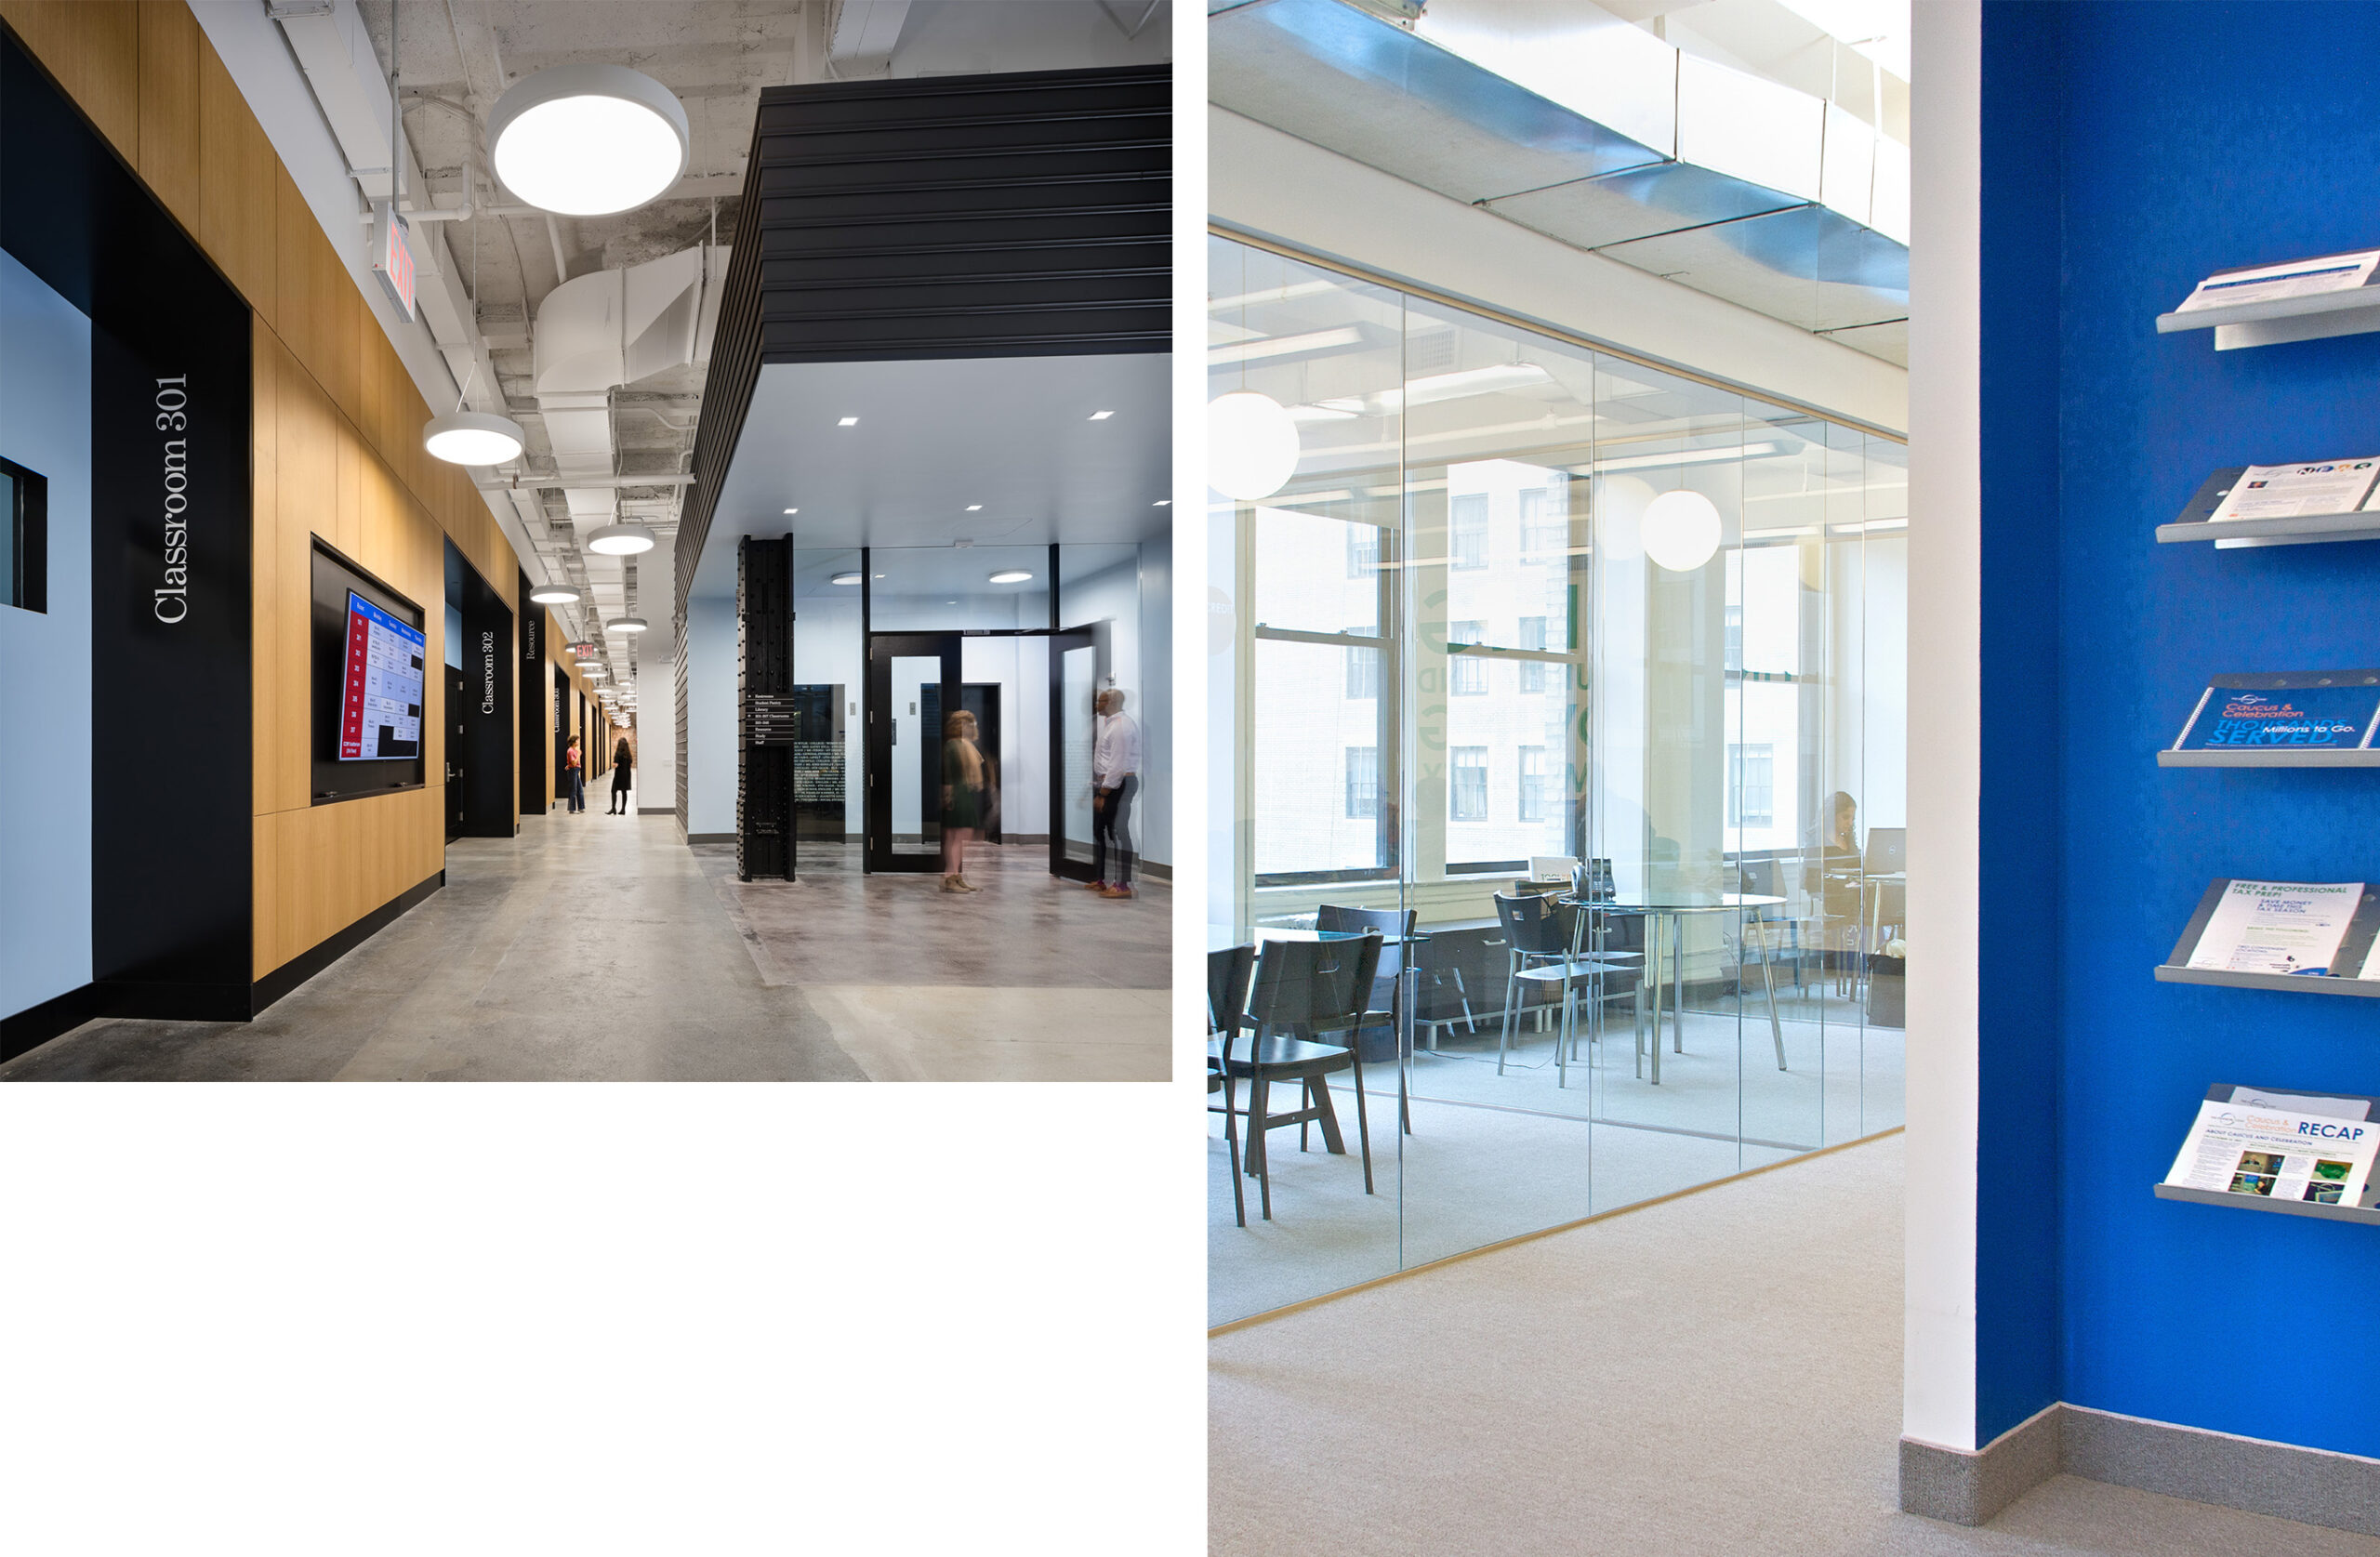 two images side by side showing the interior of a commerical space